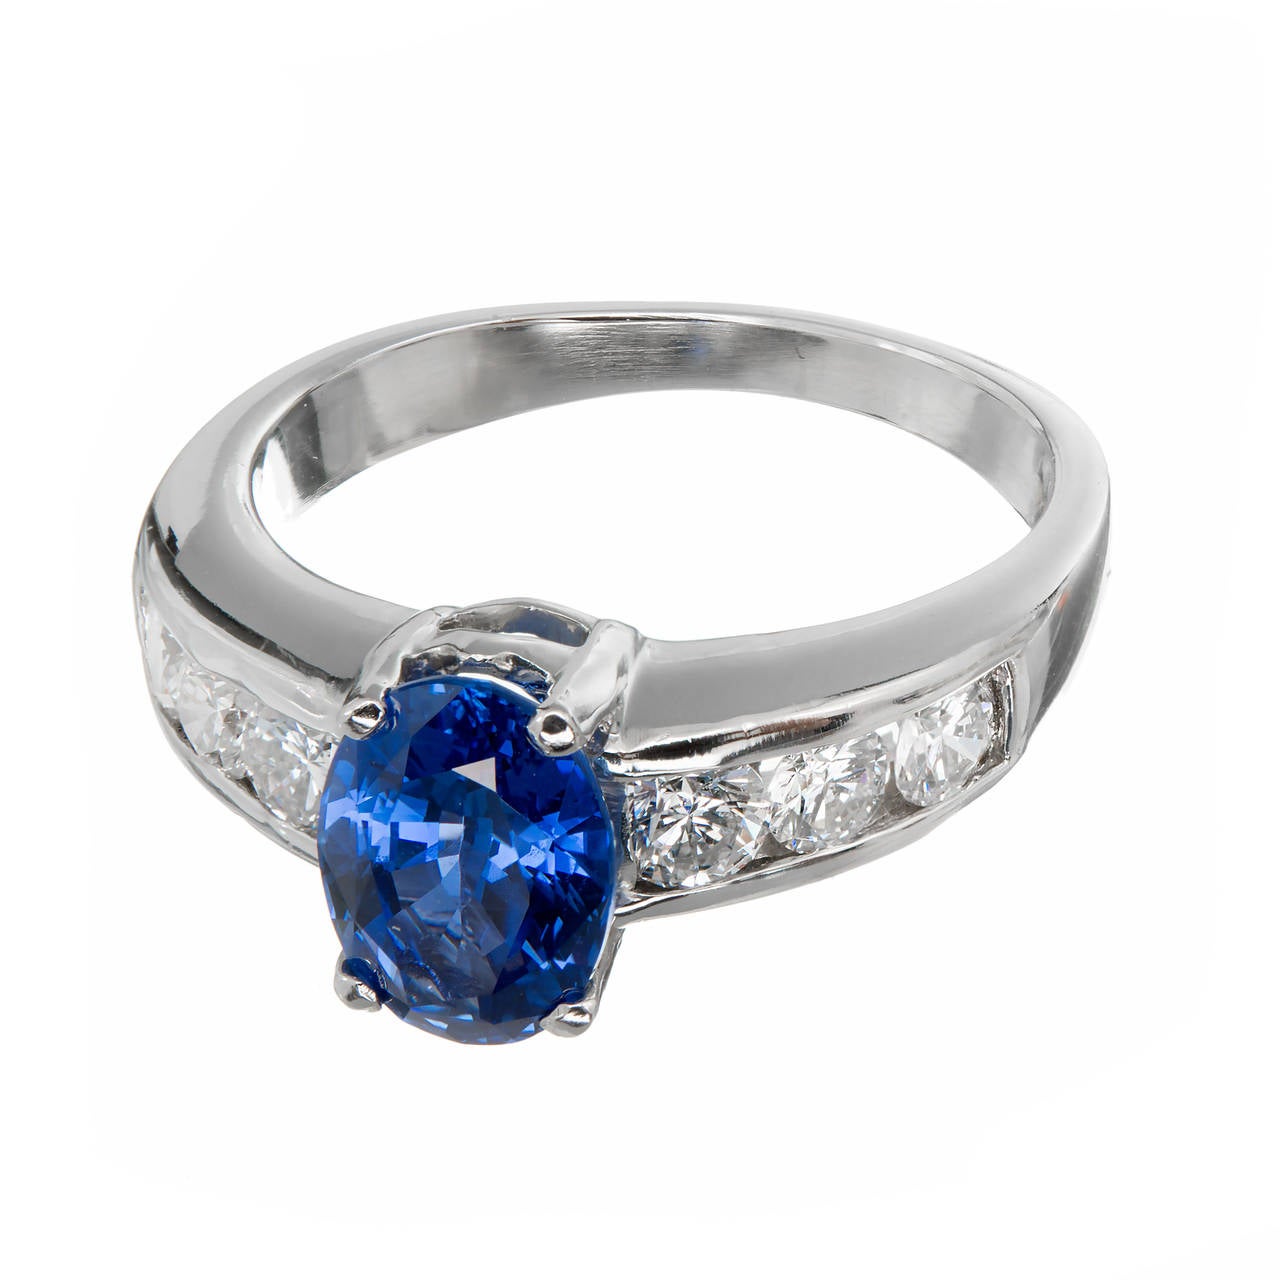 Top gem natural untreated pure bright sparkly cornflower blue Sapphire 8.28 x 6.14 x 3.96mm cut for surface area and brilliance. Bigger than many 2.00ct Sapphires. Excellent finger ring or engagement ring alternative. Includes channel set full cut